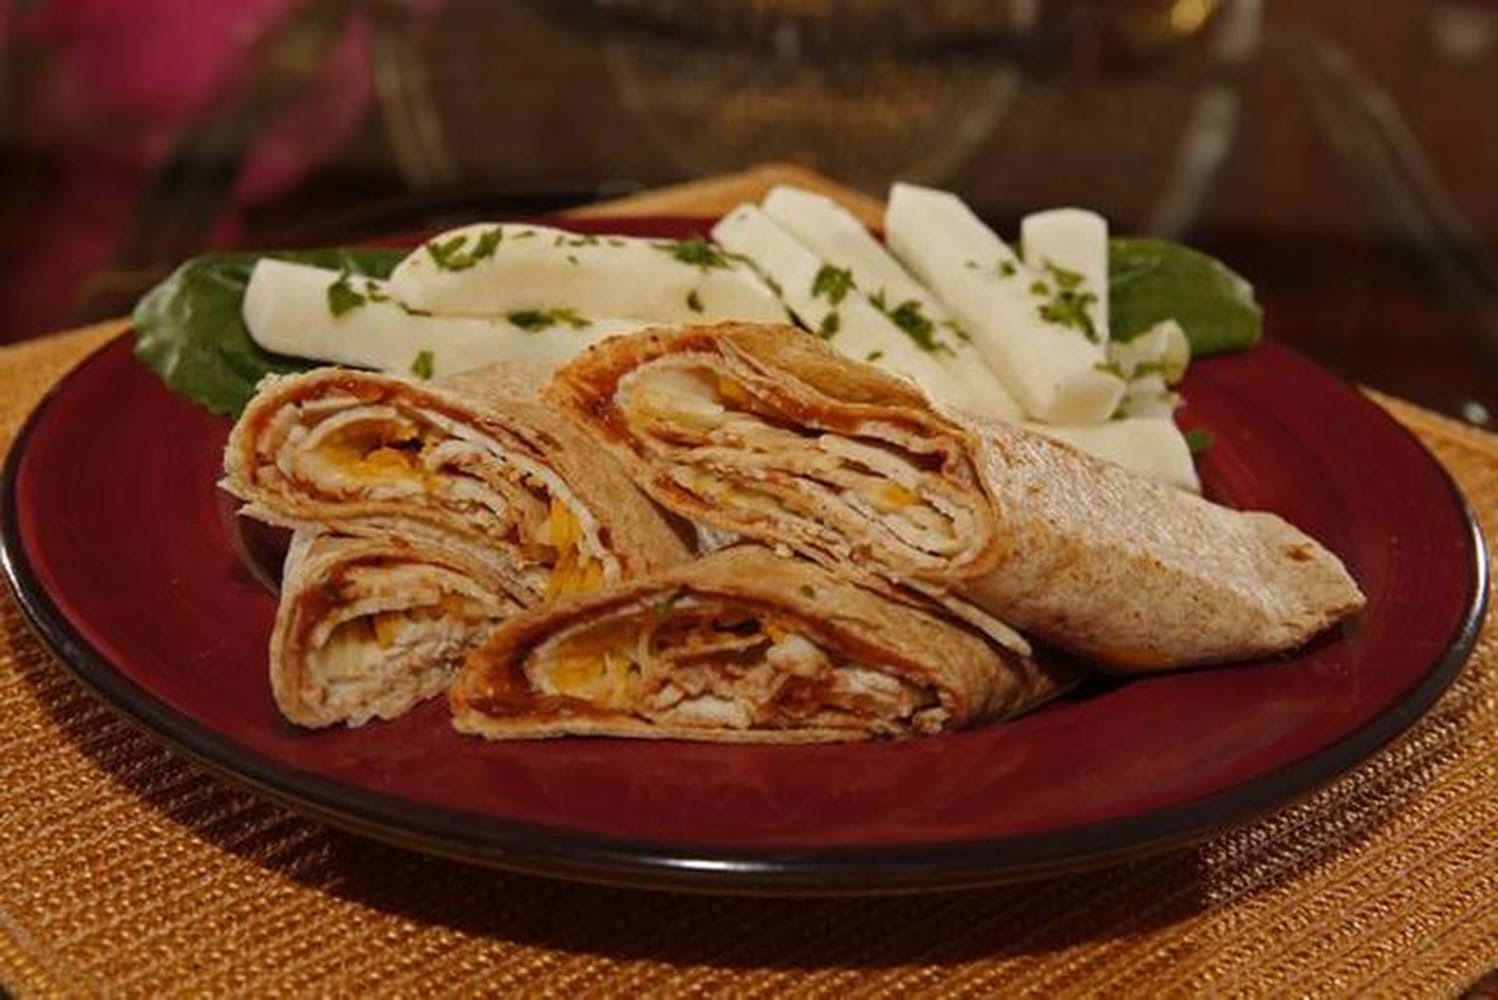 Turkey and black bean burritos are a quick, easy, Mexican-style dinner for this time of year.